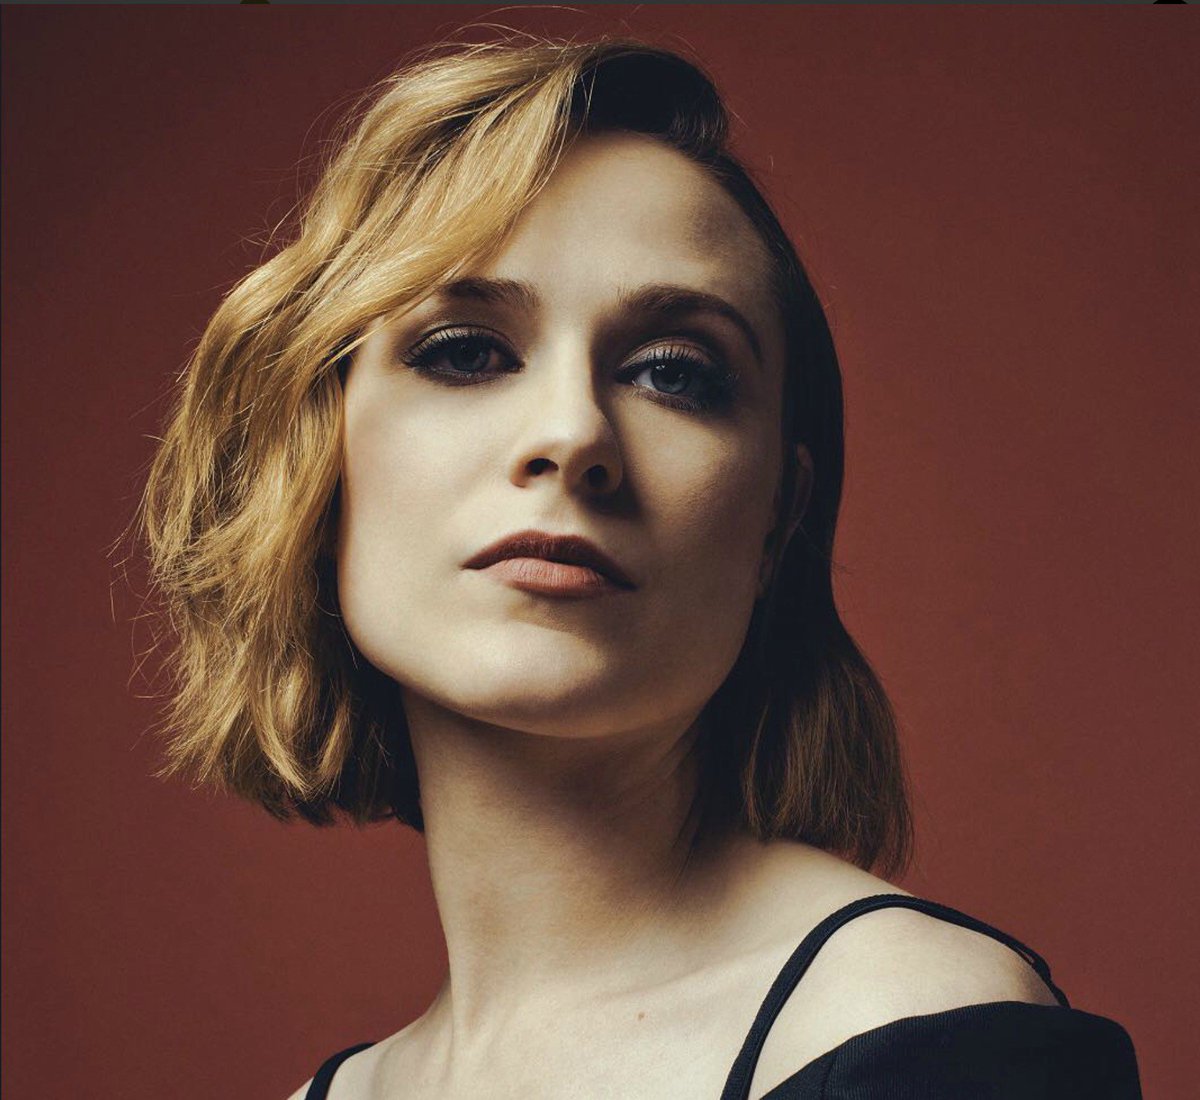 RT @Pressparty: Wake up to @evanrachelwood this morning on Good Morning America https://t.co/SAFFRlugb9 https://t.co/qFlJp9ZsGp